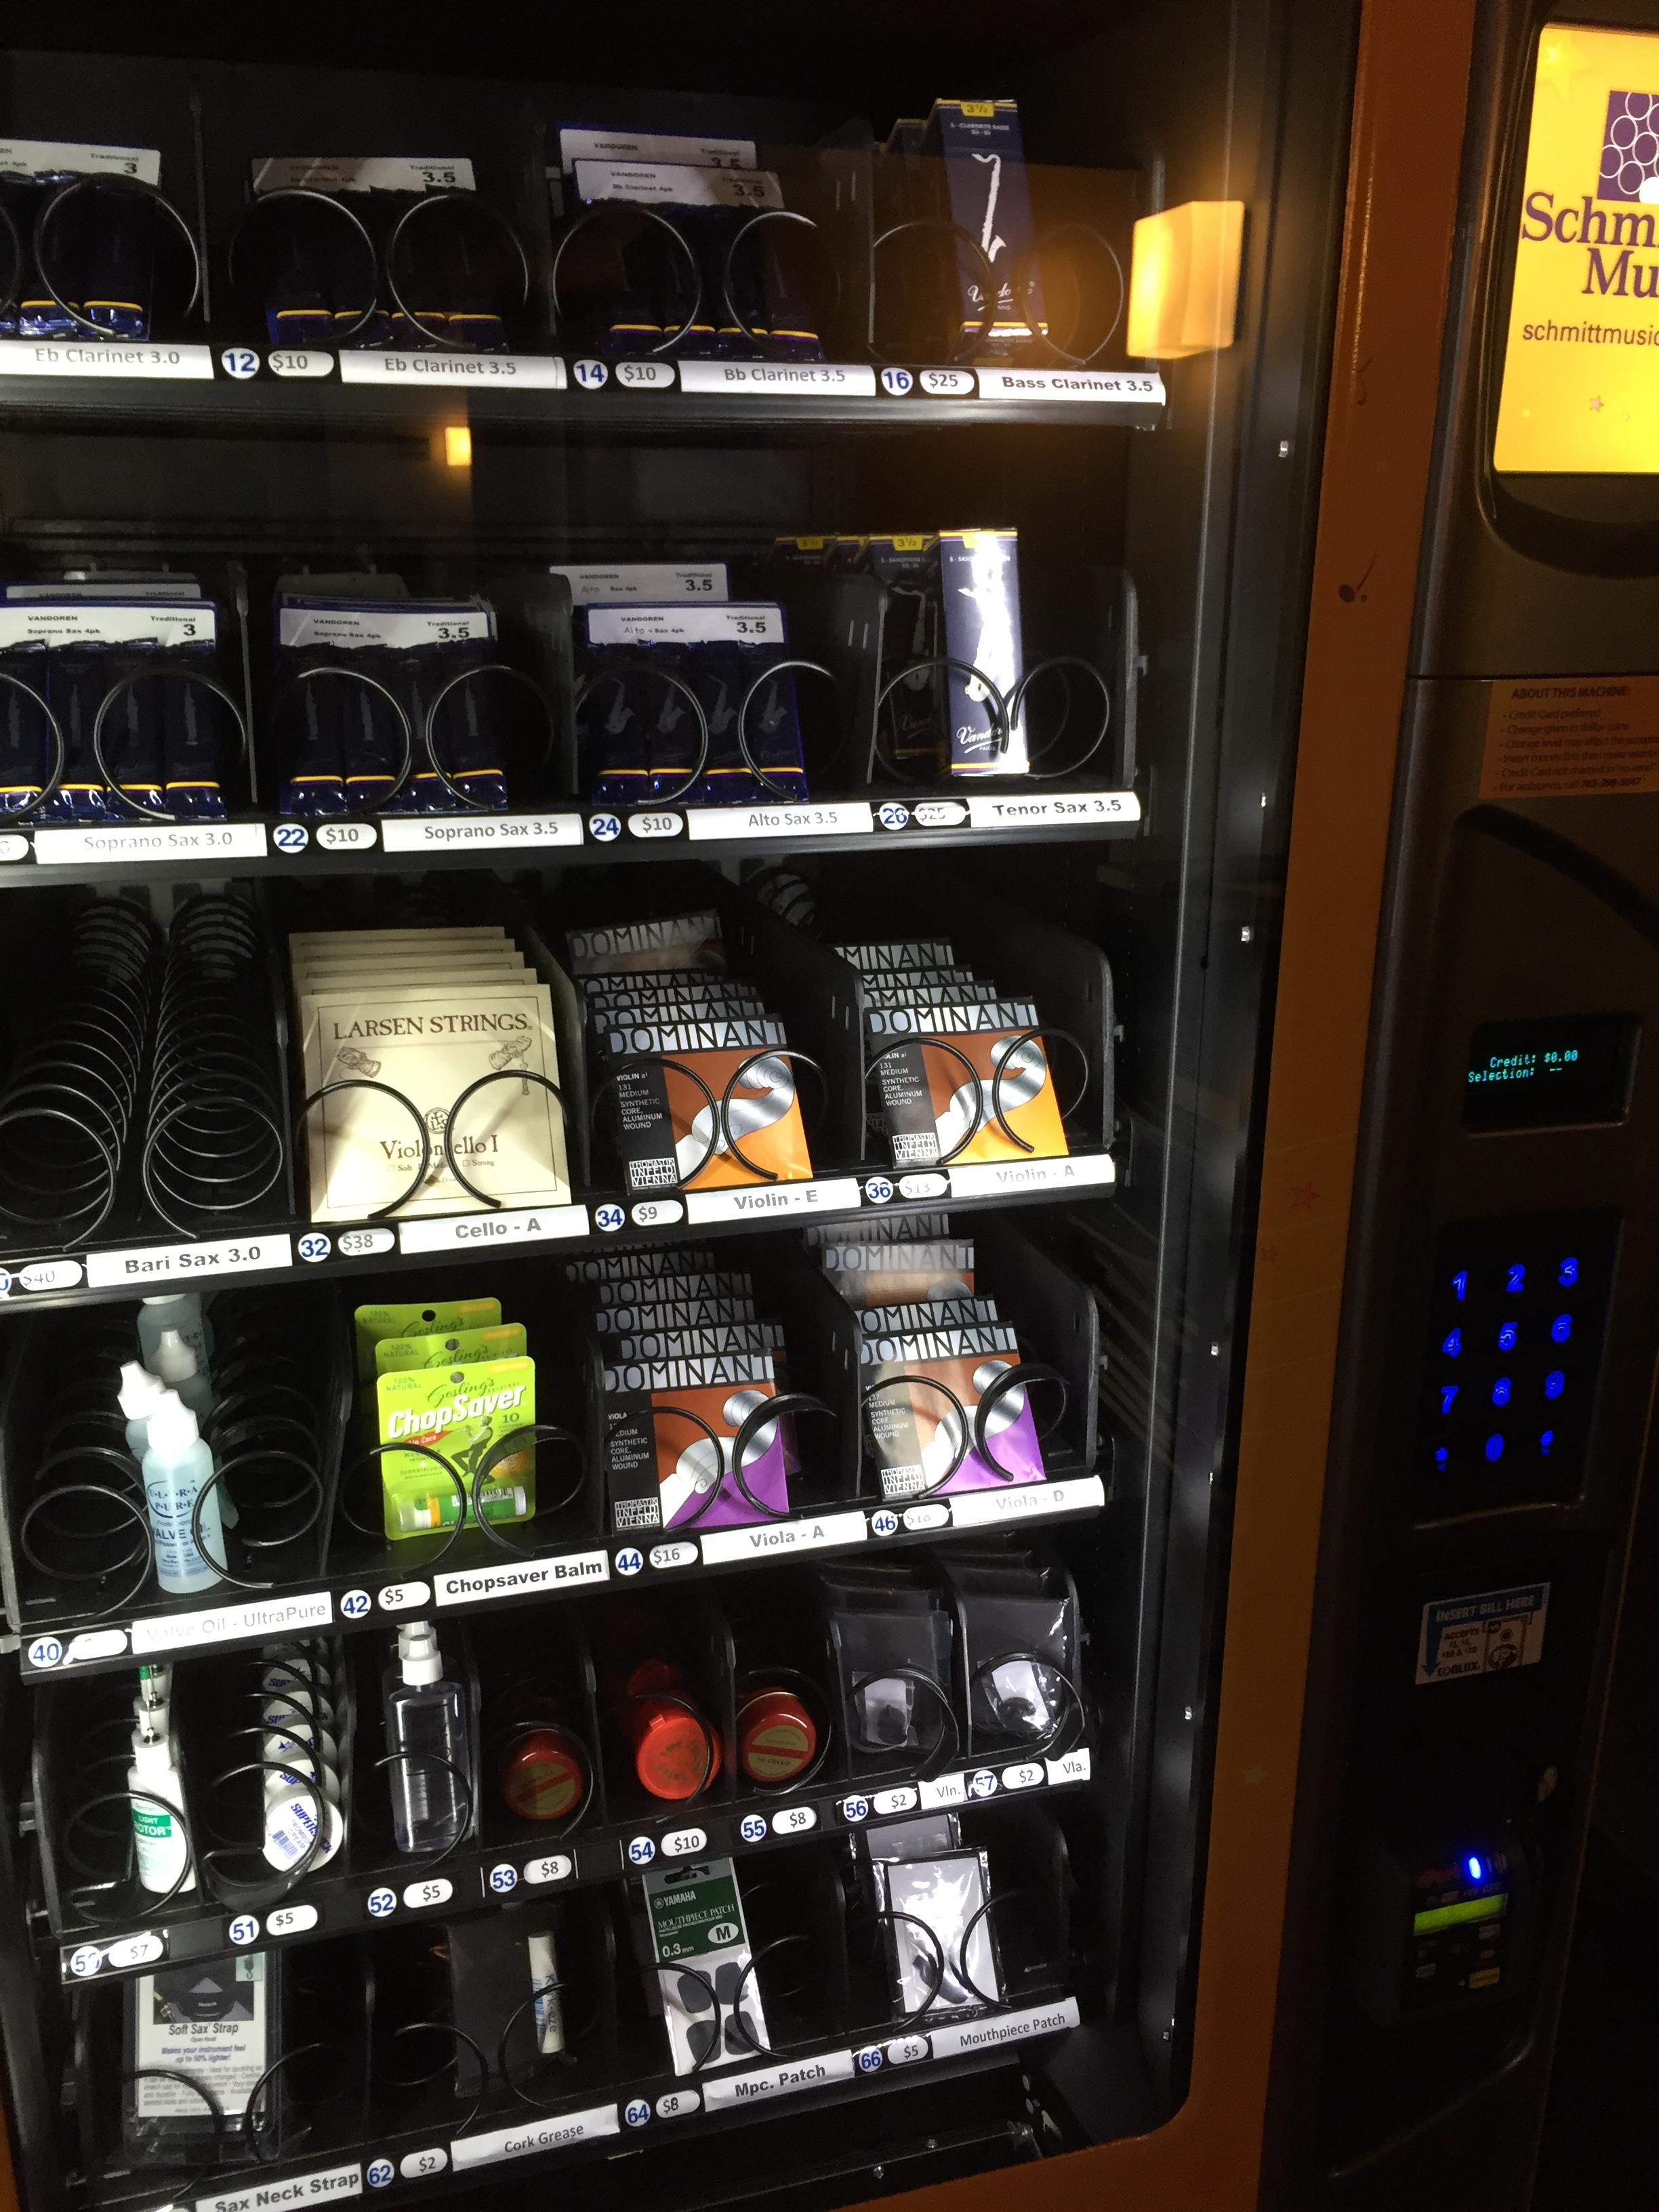 This college has a vending machine for violin strings and woodwind reeds.